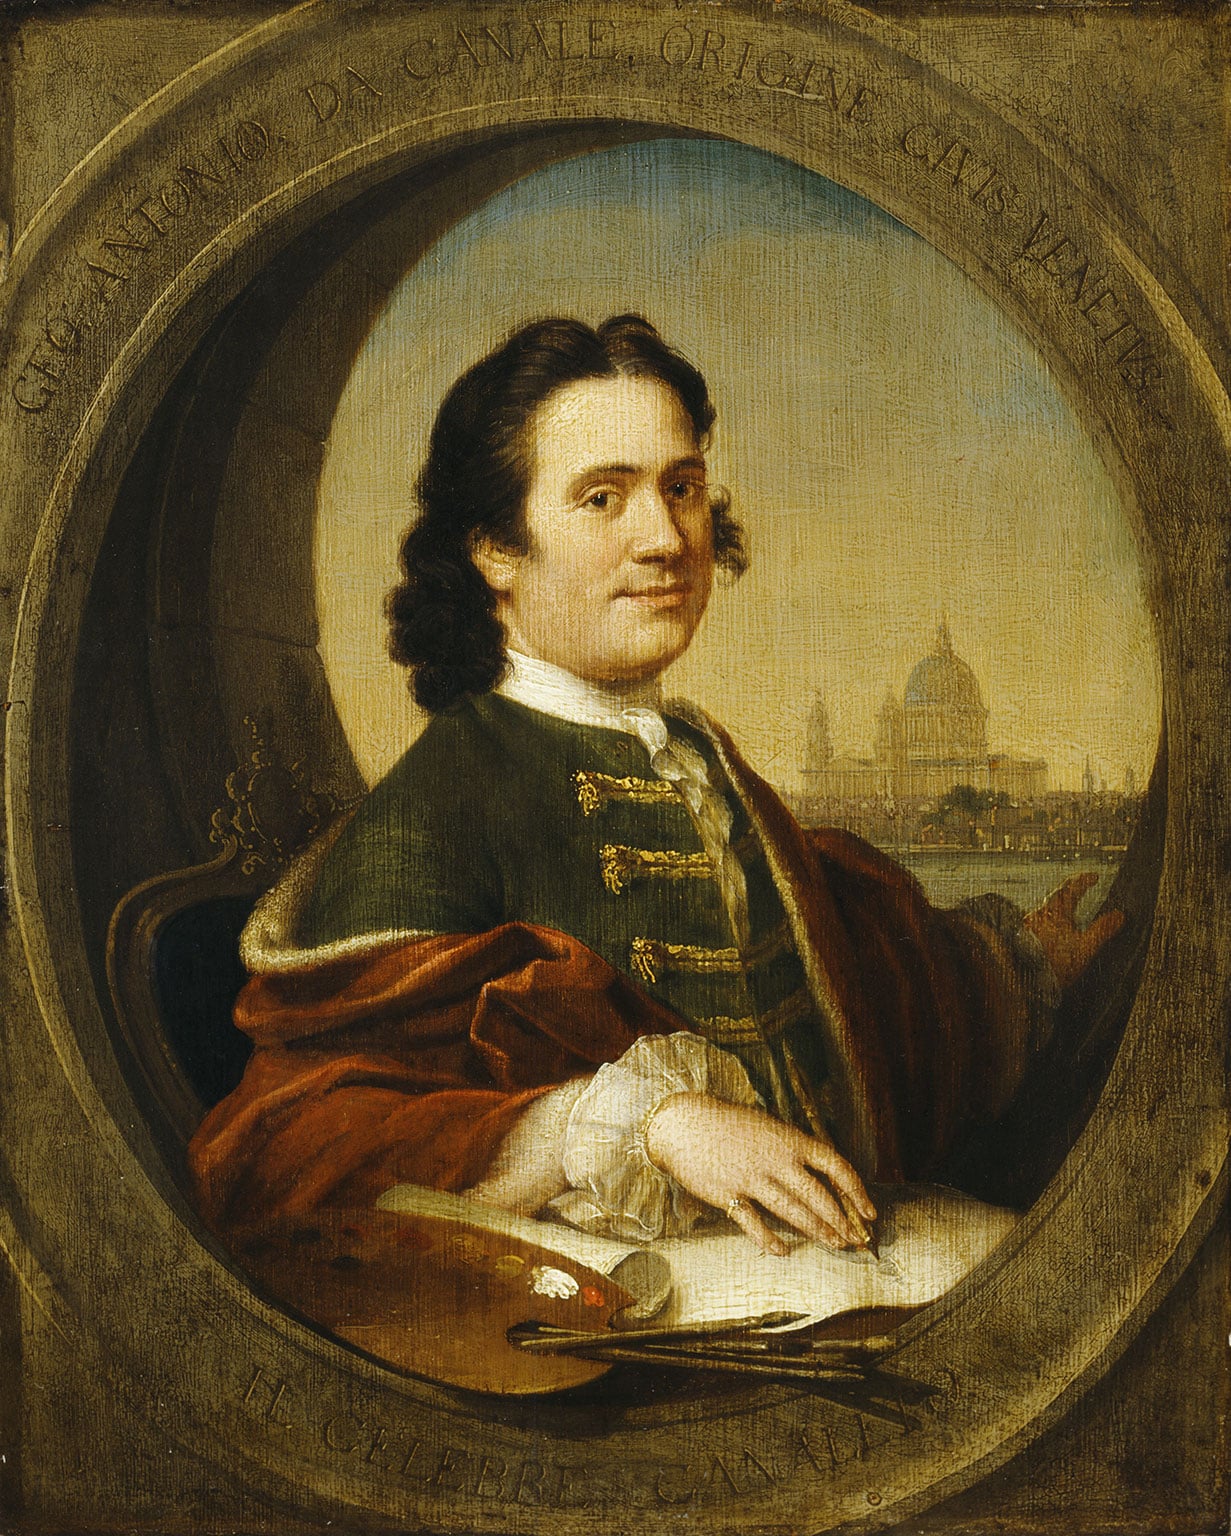 Canaletto-1697-1768 (20).jpg